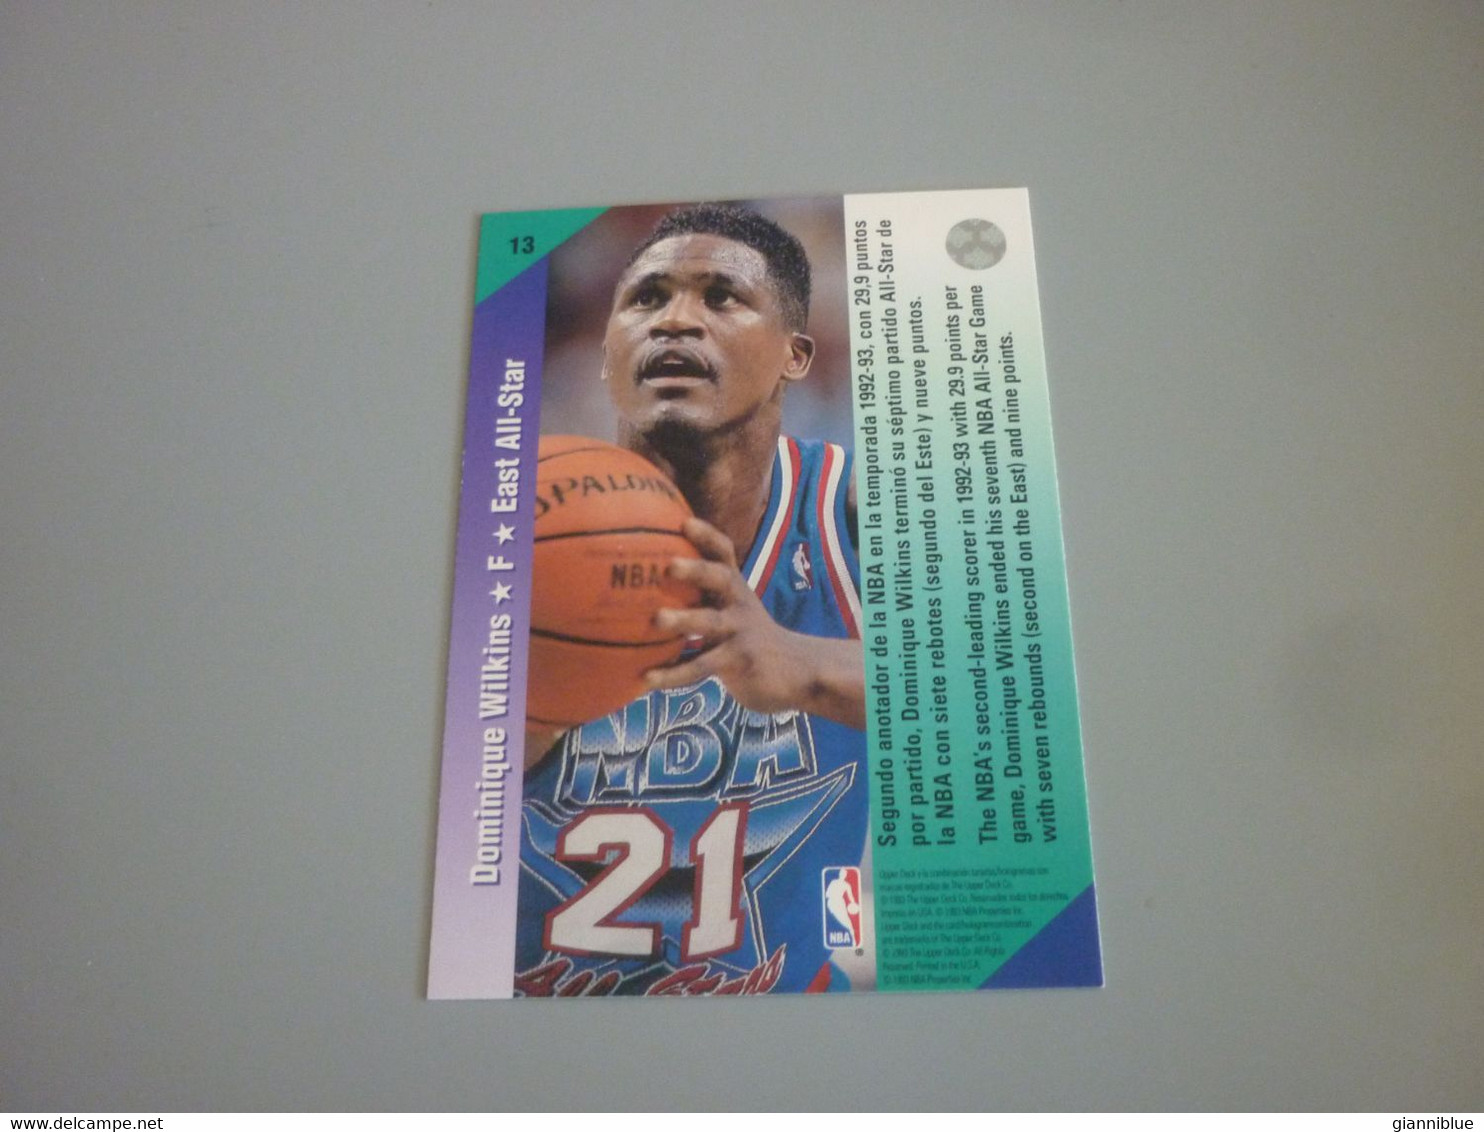 Dominique Wilkins East All Star Game Basketball Upper Deck 1992-93 Spanish Edition Trading Card #13 - 1990-1999